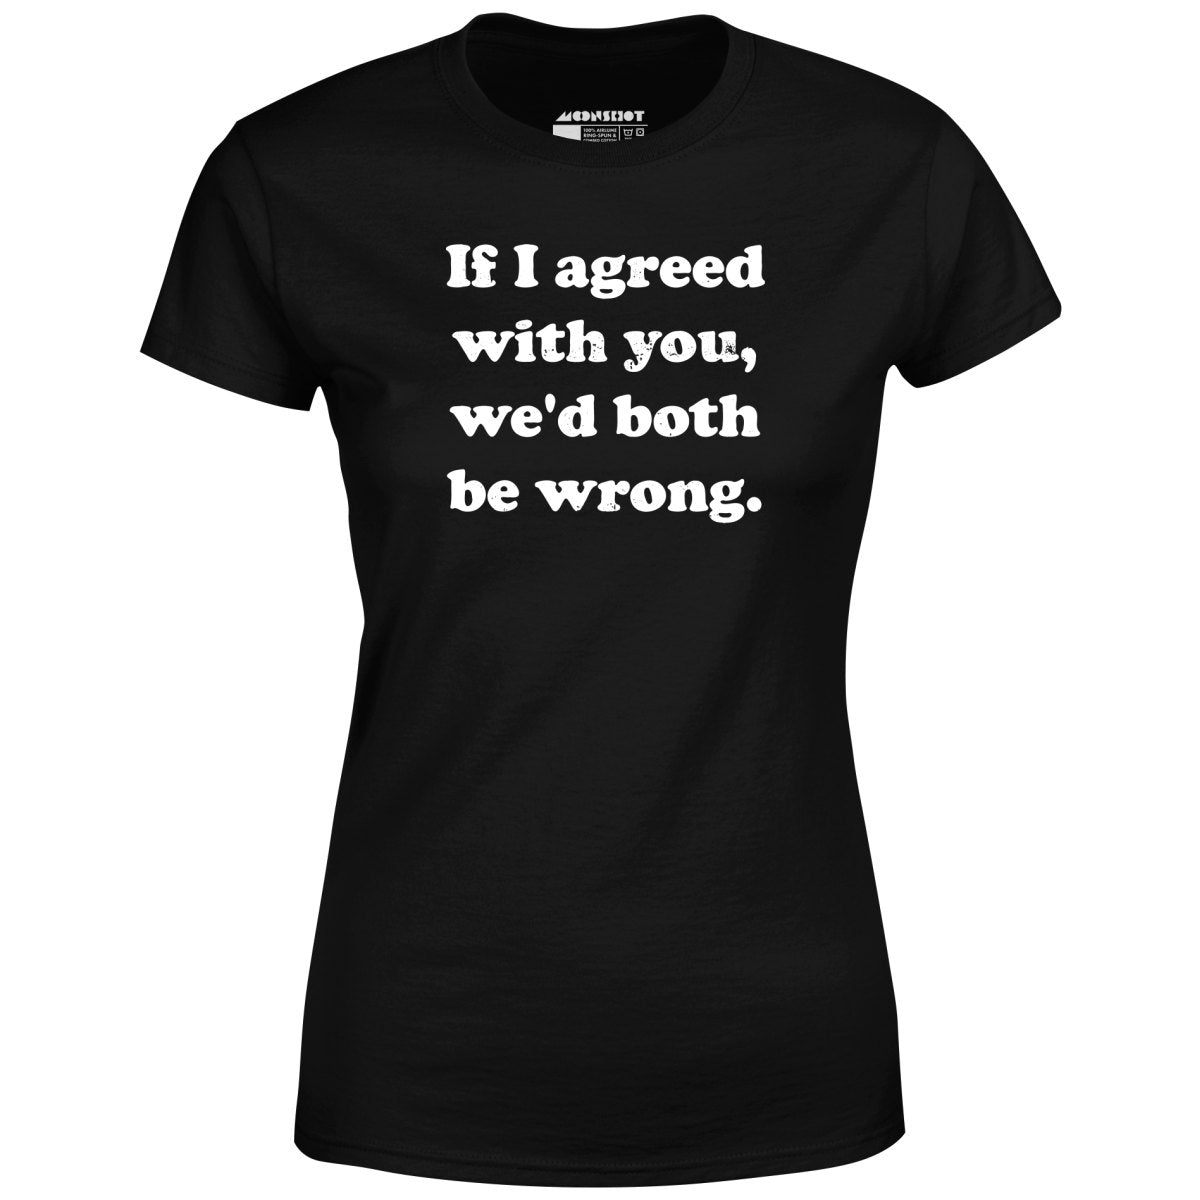 If I Agreed With You, We'd Both Be Wrong - Women's T-Shirt